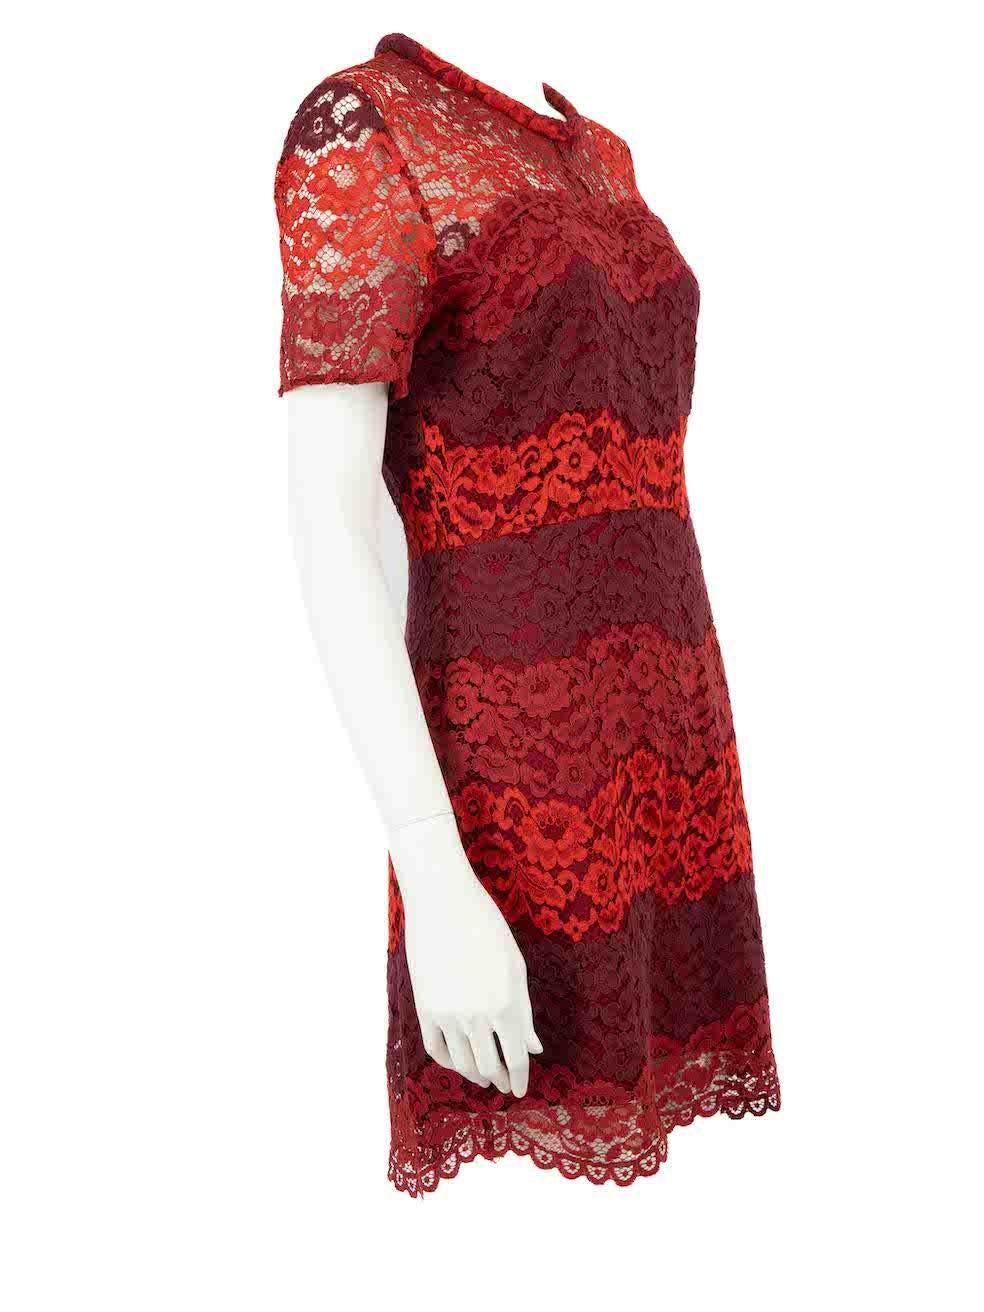 CONDITION is Very good. Hardly any visible wear to dress is evident on this used Sandro designer resale item.
 
 Details
 Red
 Lace
 Dress
 Mini
 Short sleeves
 Round neck
 Striped floral lace
 Back zipped fastening
 Figure hugging fit
 
 
 Made in